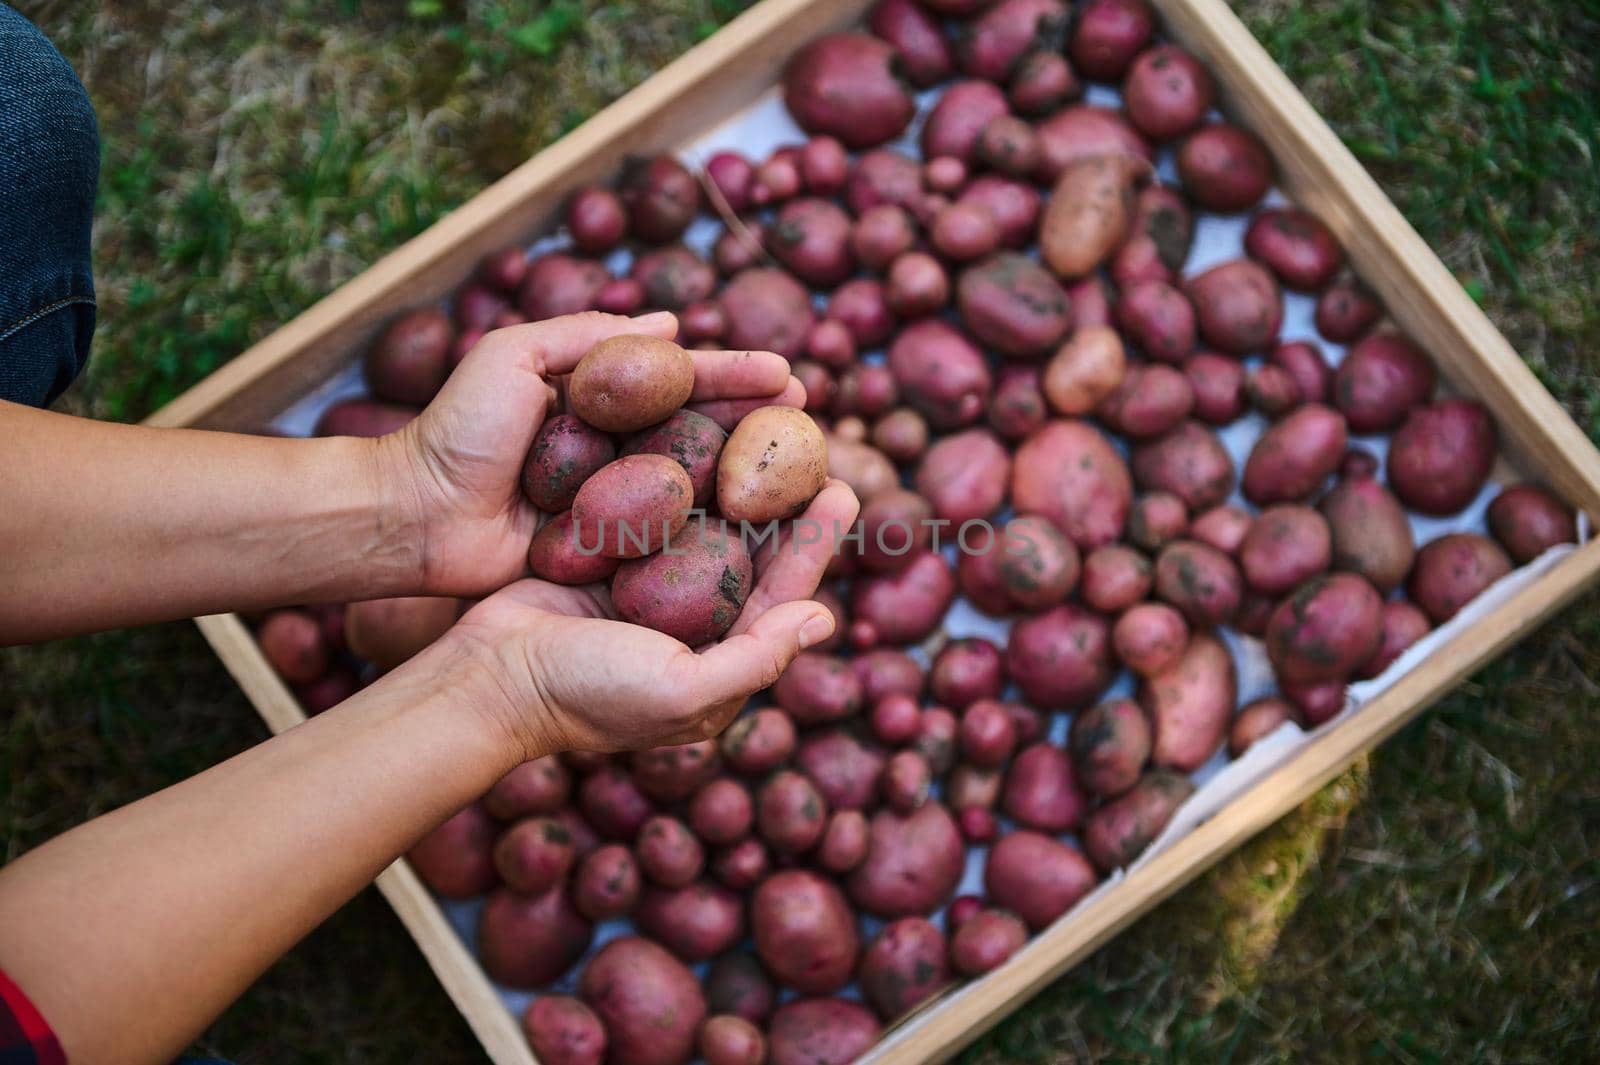 Top view of the hands of a farmer agronomist holding freshly dug organic potatoes over wooden crate with harvested crop by artgf